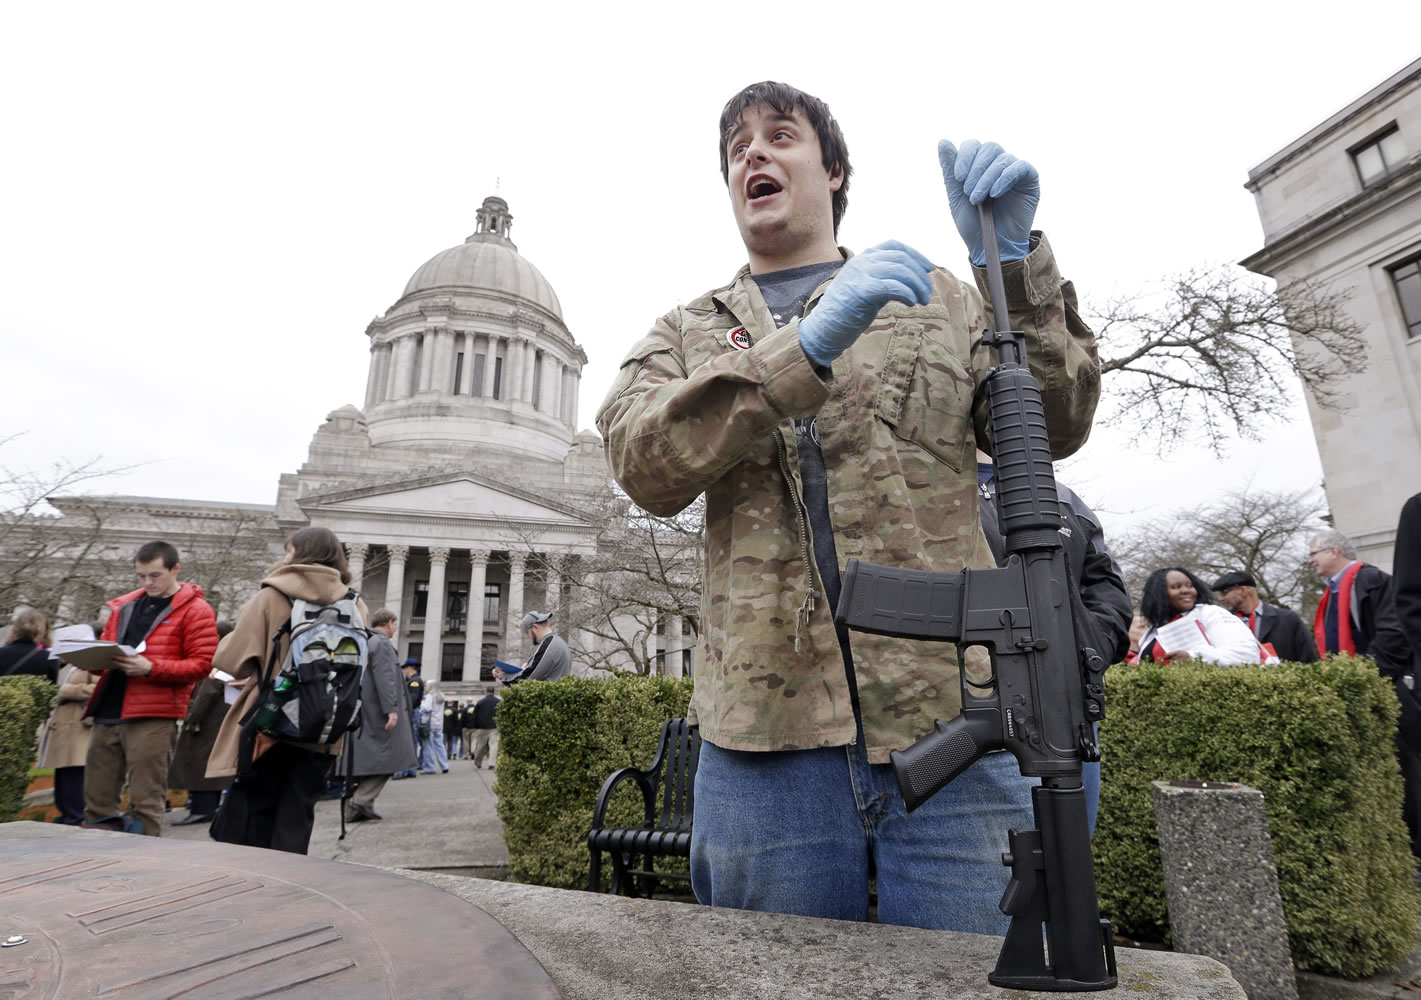 Devyn Hembry leans on his Bushmaster rifle as he waits to get in line to enter a House panel hearing on an initiative to expand firearm background checks in the state on Jan. 28 in Olympia.